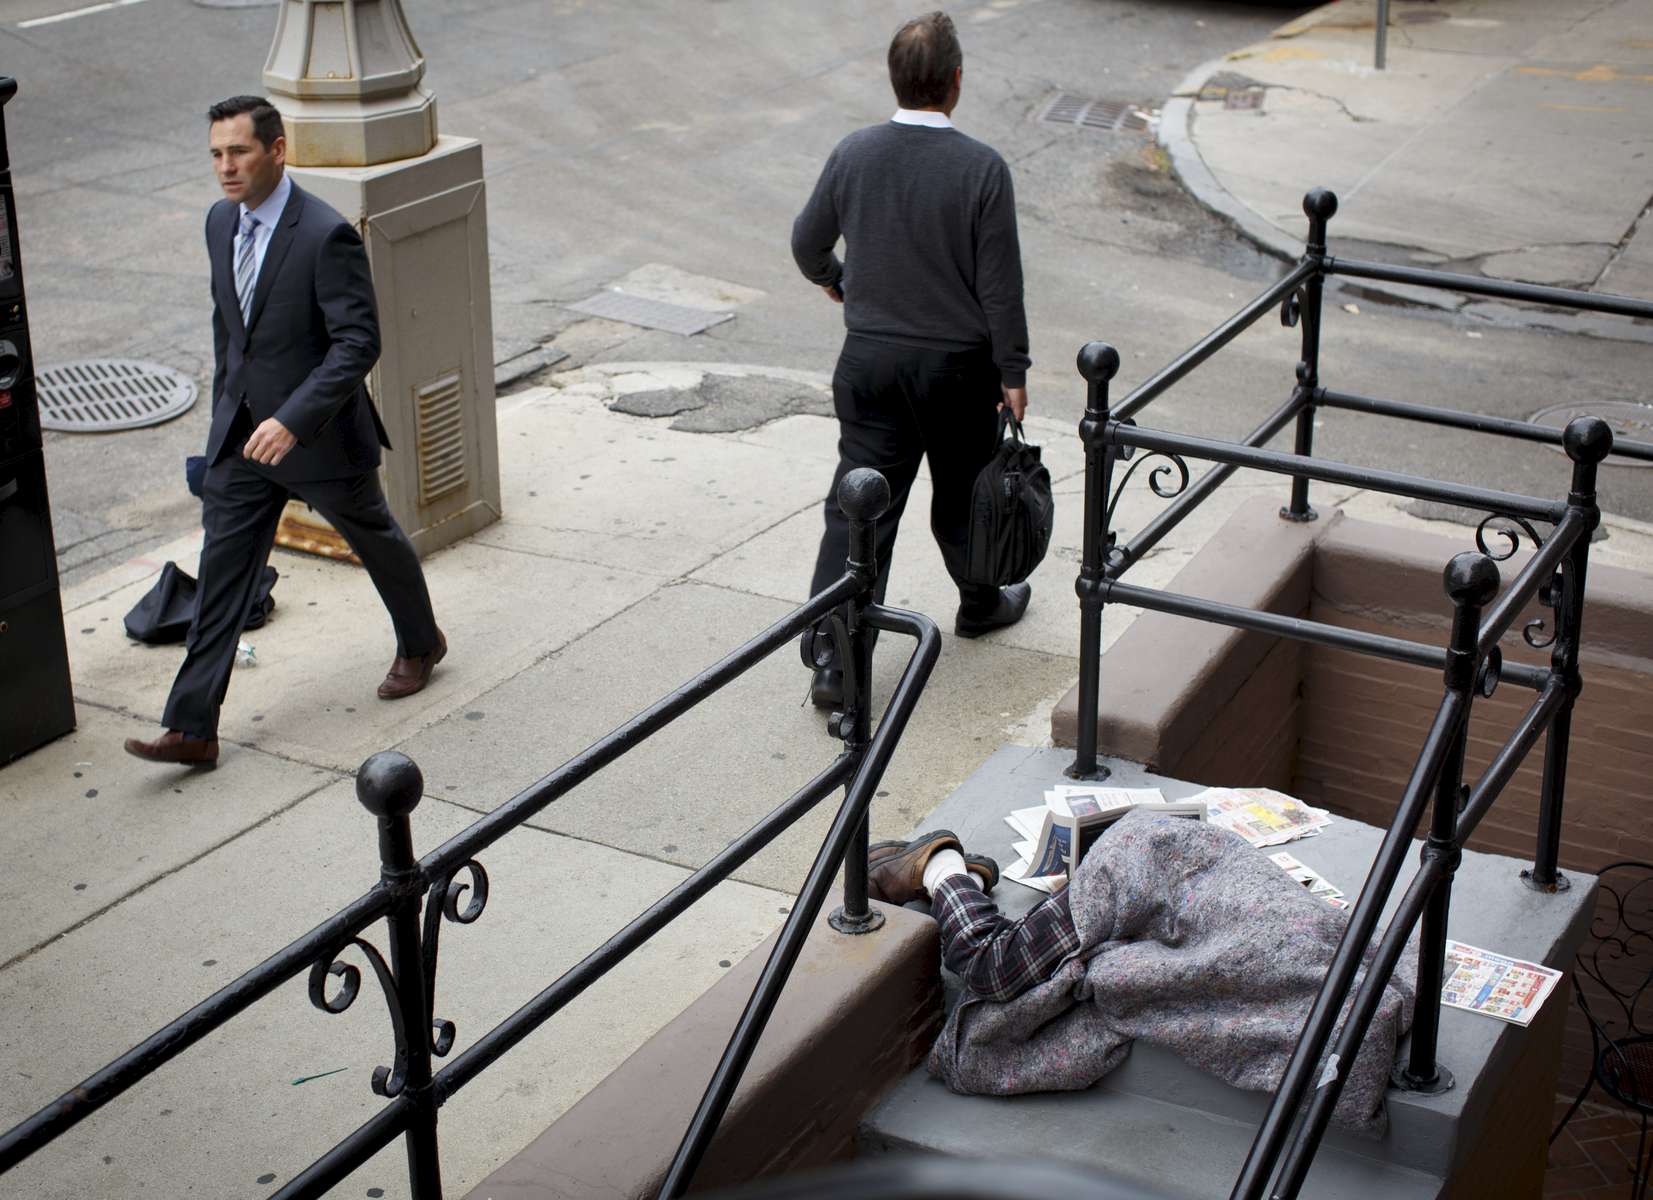 10/1/2015 - Boston, MA - Back Bay - Passersby rush past a homeless person sleeping on the steps of a Berkely Street business on Thursday morning, October 1, 2015. As concern about the city's chronic homeless population grows, business groups and other agencies are coordinating with the city to address the issue. Topic: 01homeless. Story by Katie Johnston/Globe Staff. Dina Rudick/Globe Staff.